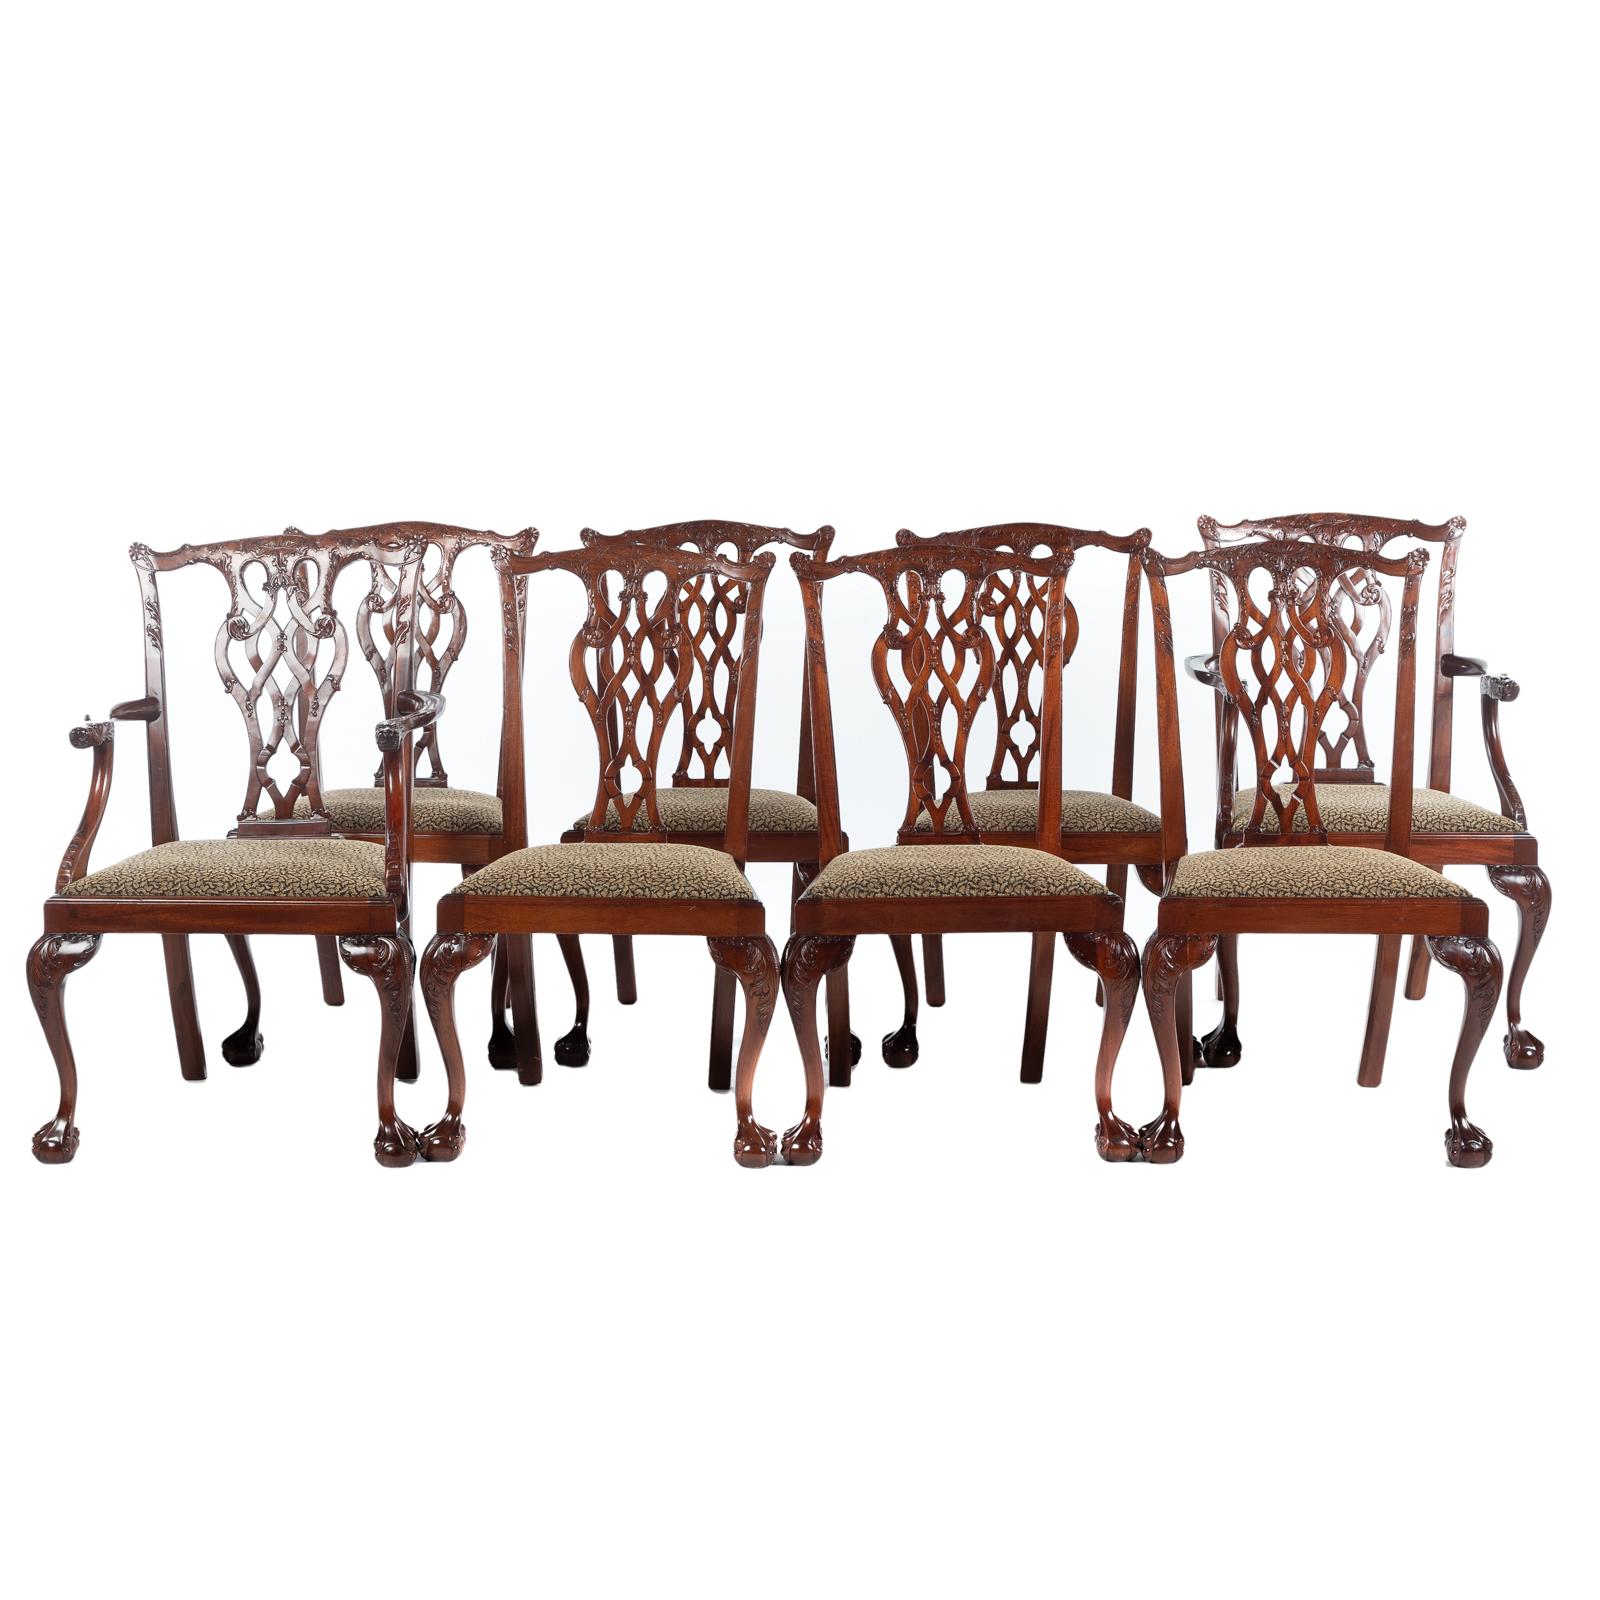 EIGHT CHIPPENDALE STYLE MAHOGANY 36a4e4